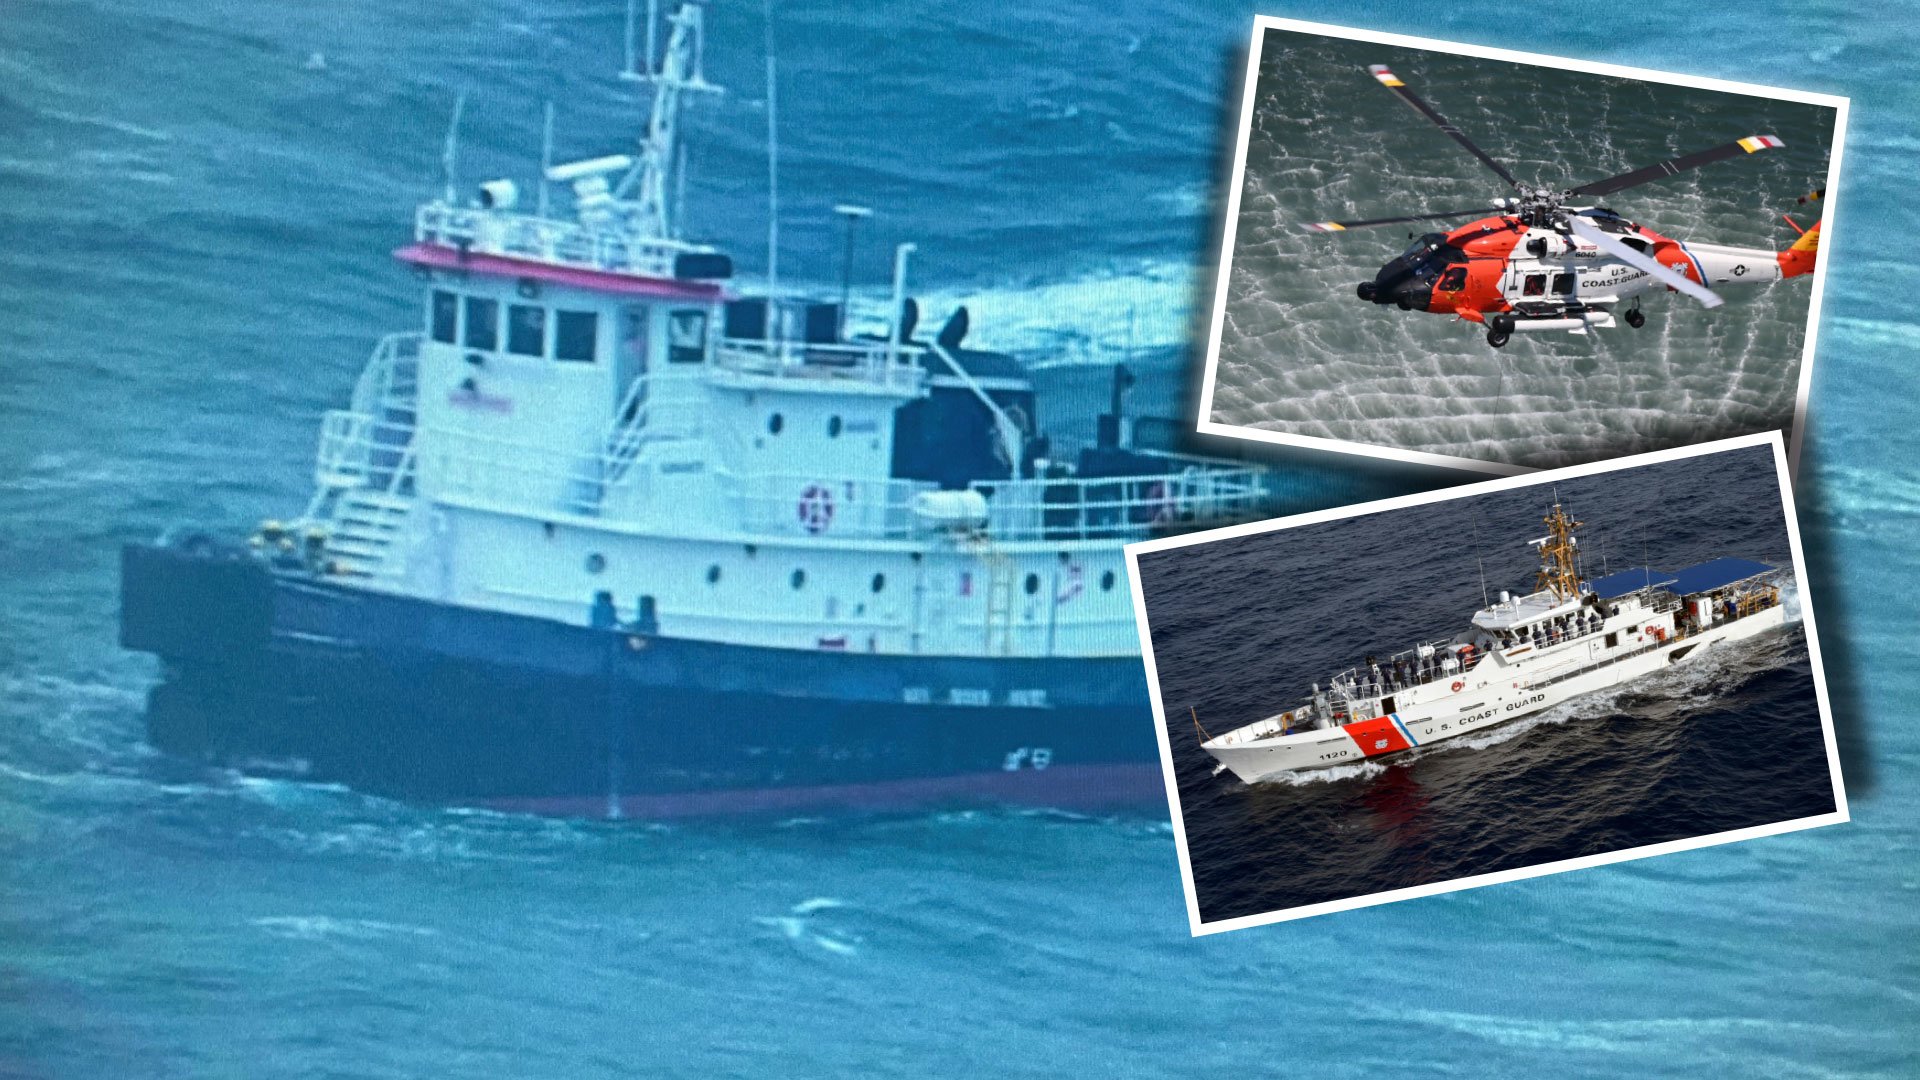 A US Coast Guard sector diverted a cutter and launched two helicopters from coastal air stations on Saturday, Jan. 14, 2023, when they received a distress call from a crew member on board a disabled tugboat. US Coast Guard photos. Composite by Noelle Wiehe/Coffee or Die Magazine.